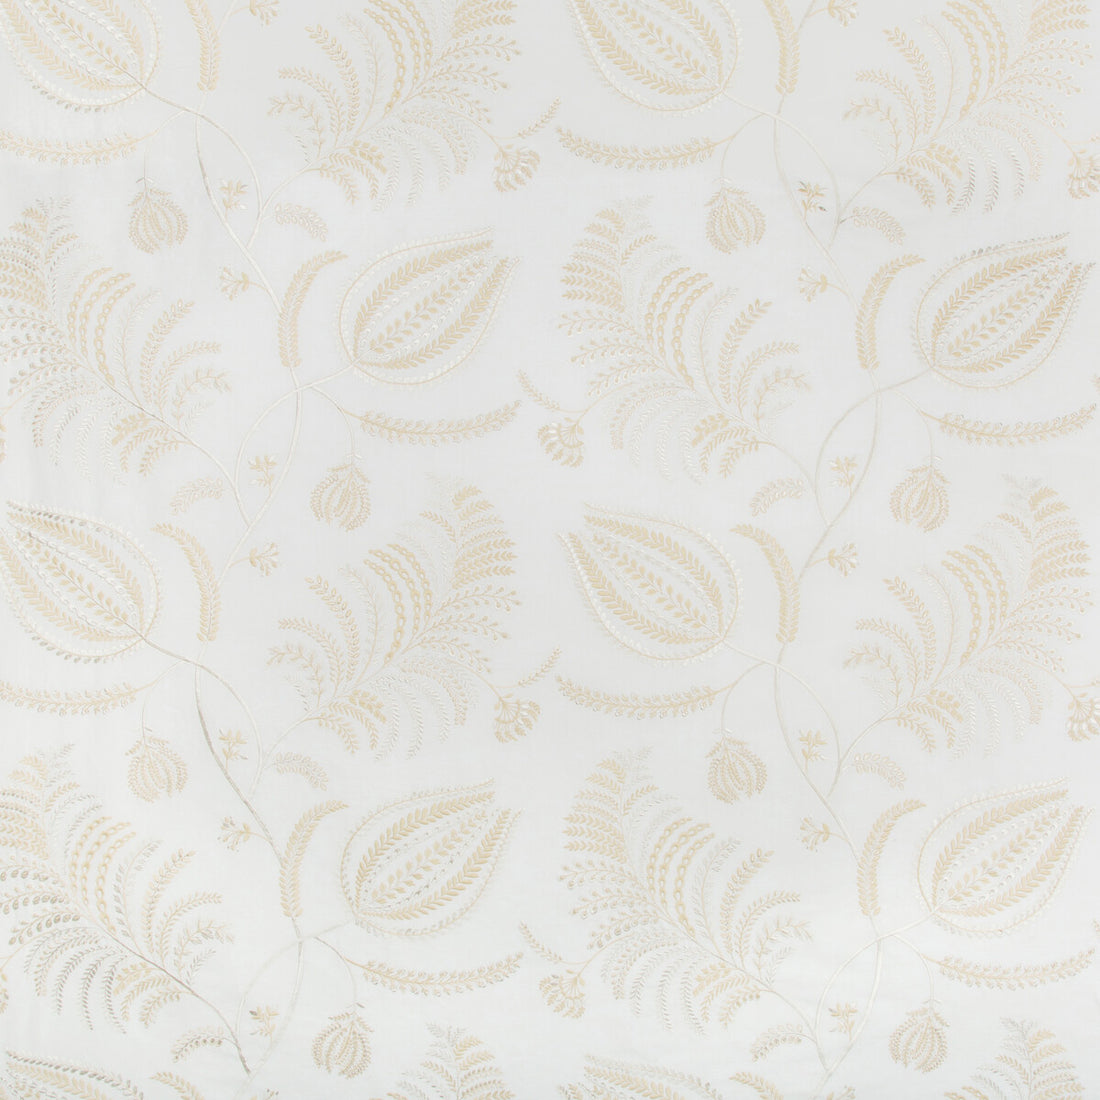 Palmero Emb fabric in ivory/beige color - pattern 2017158.16.0 - by Lee Jofa in the Westport collection